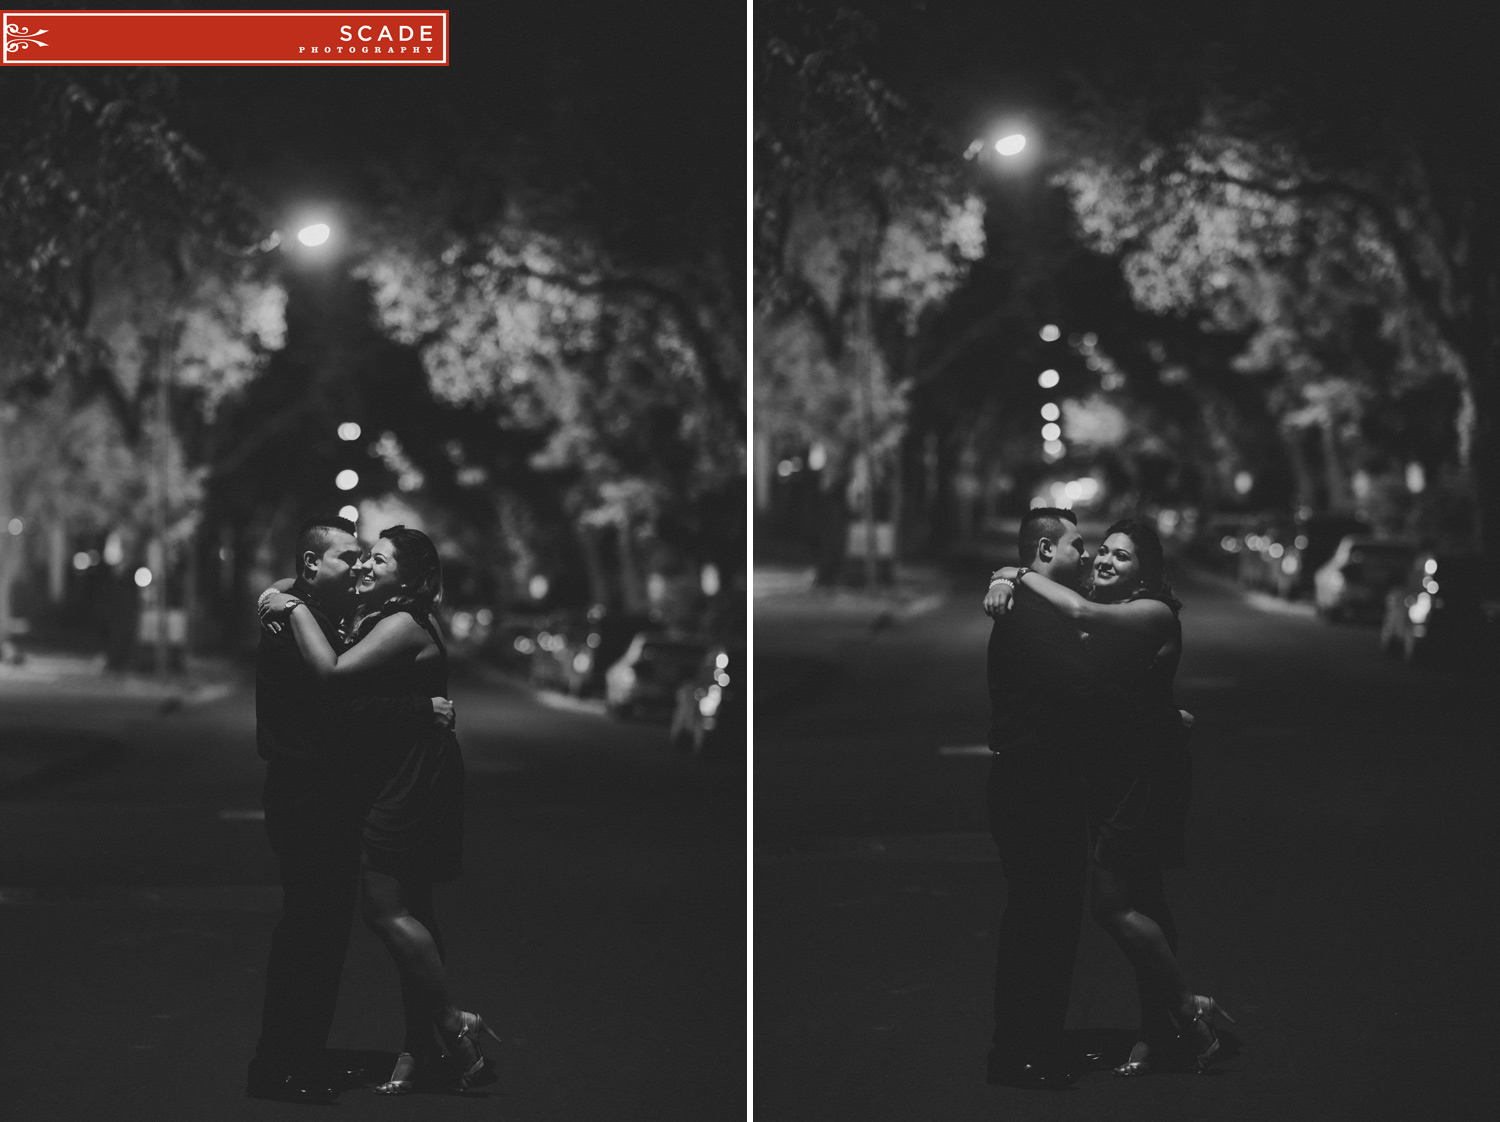 Fall Engagement Nighttime session